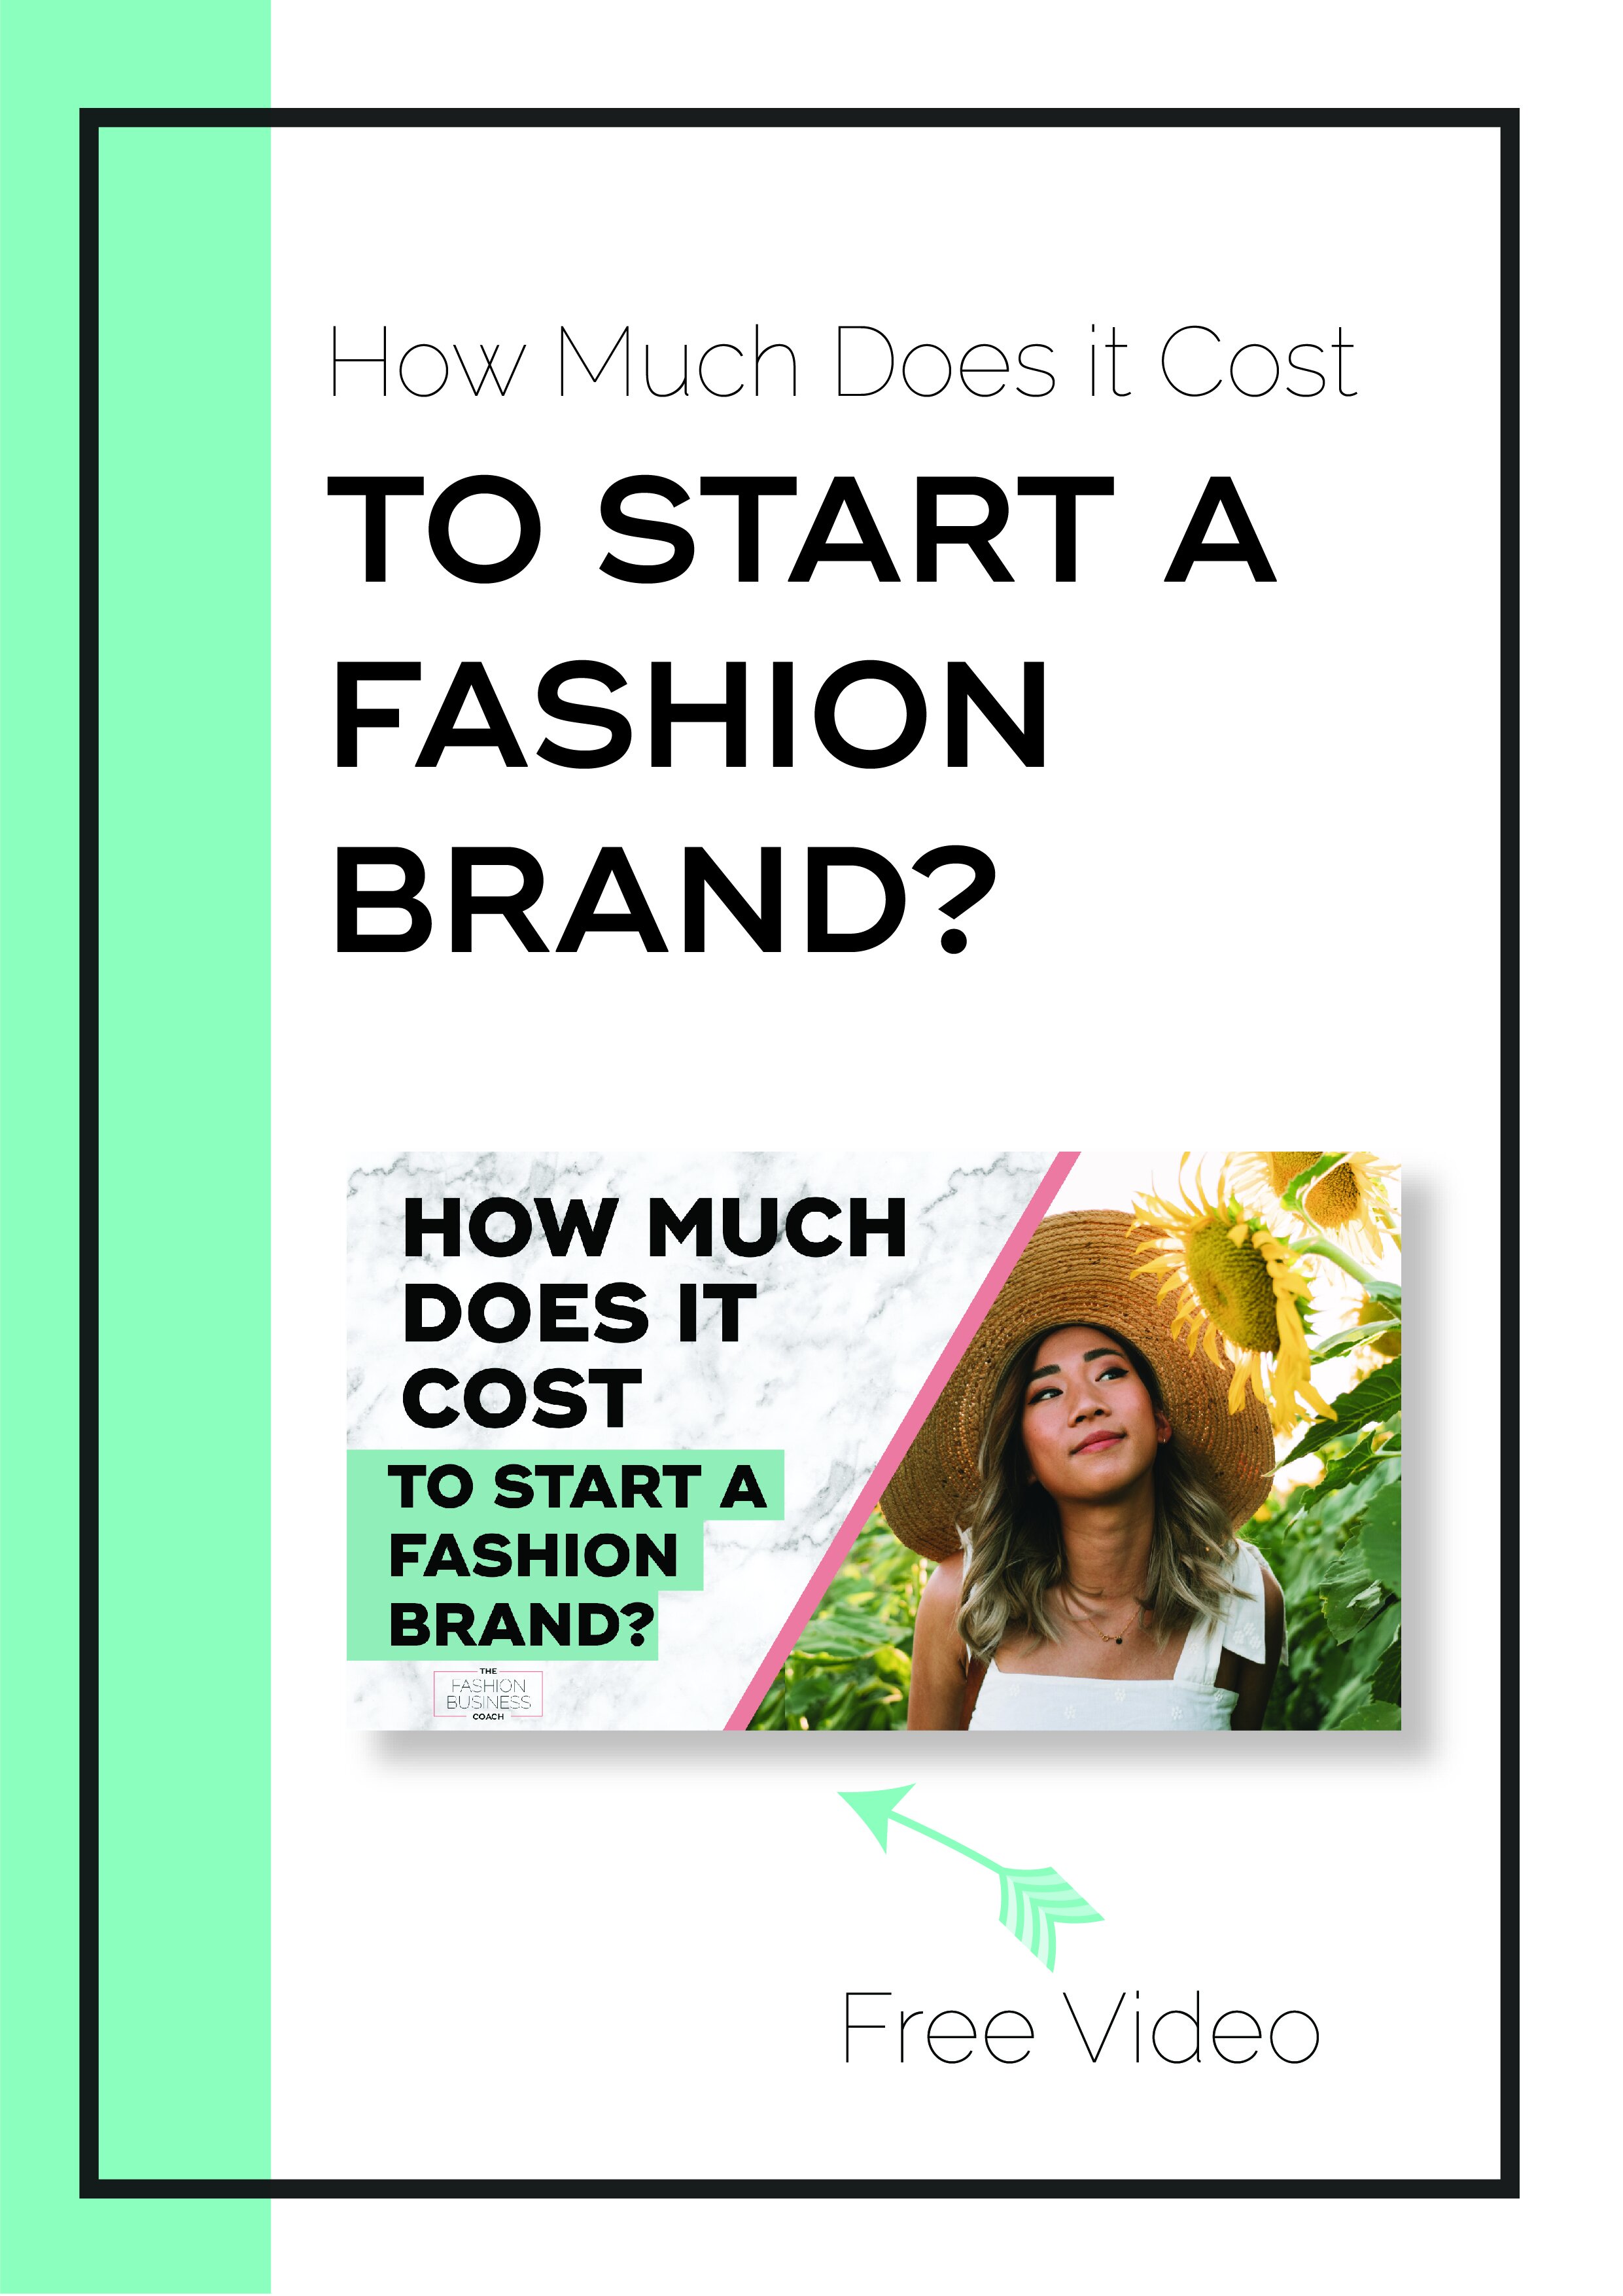 How Much Does it Cost to Start a Fashion Brand 1.jpg